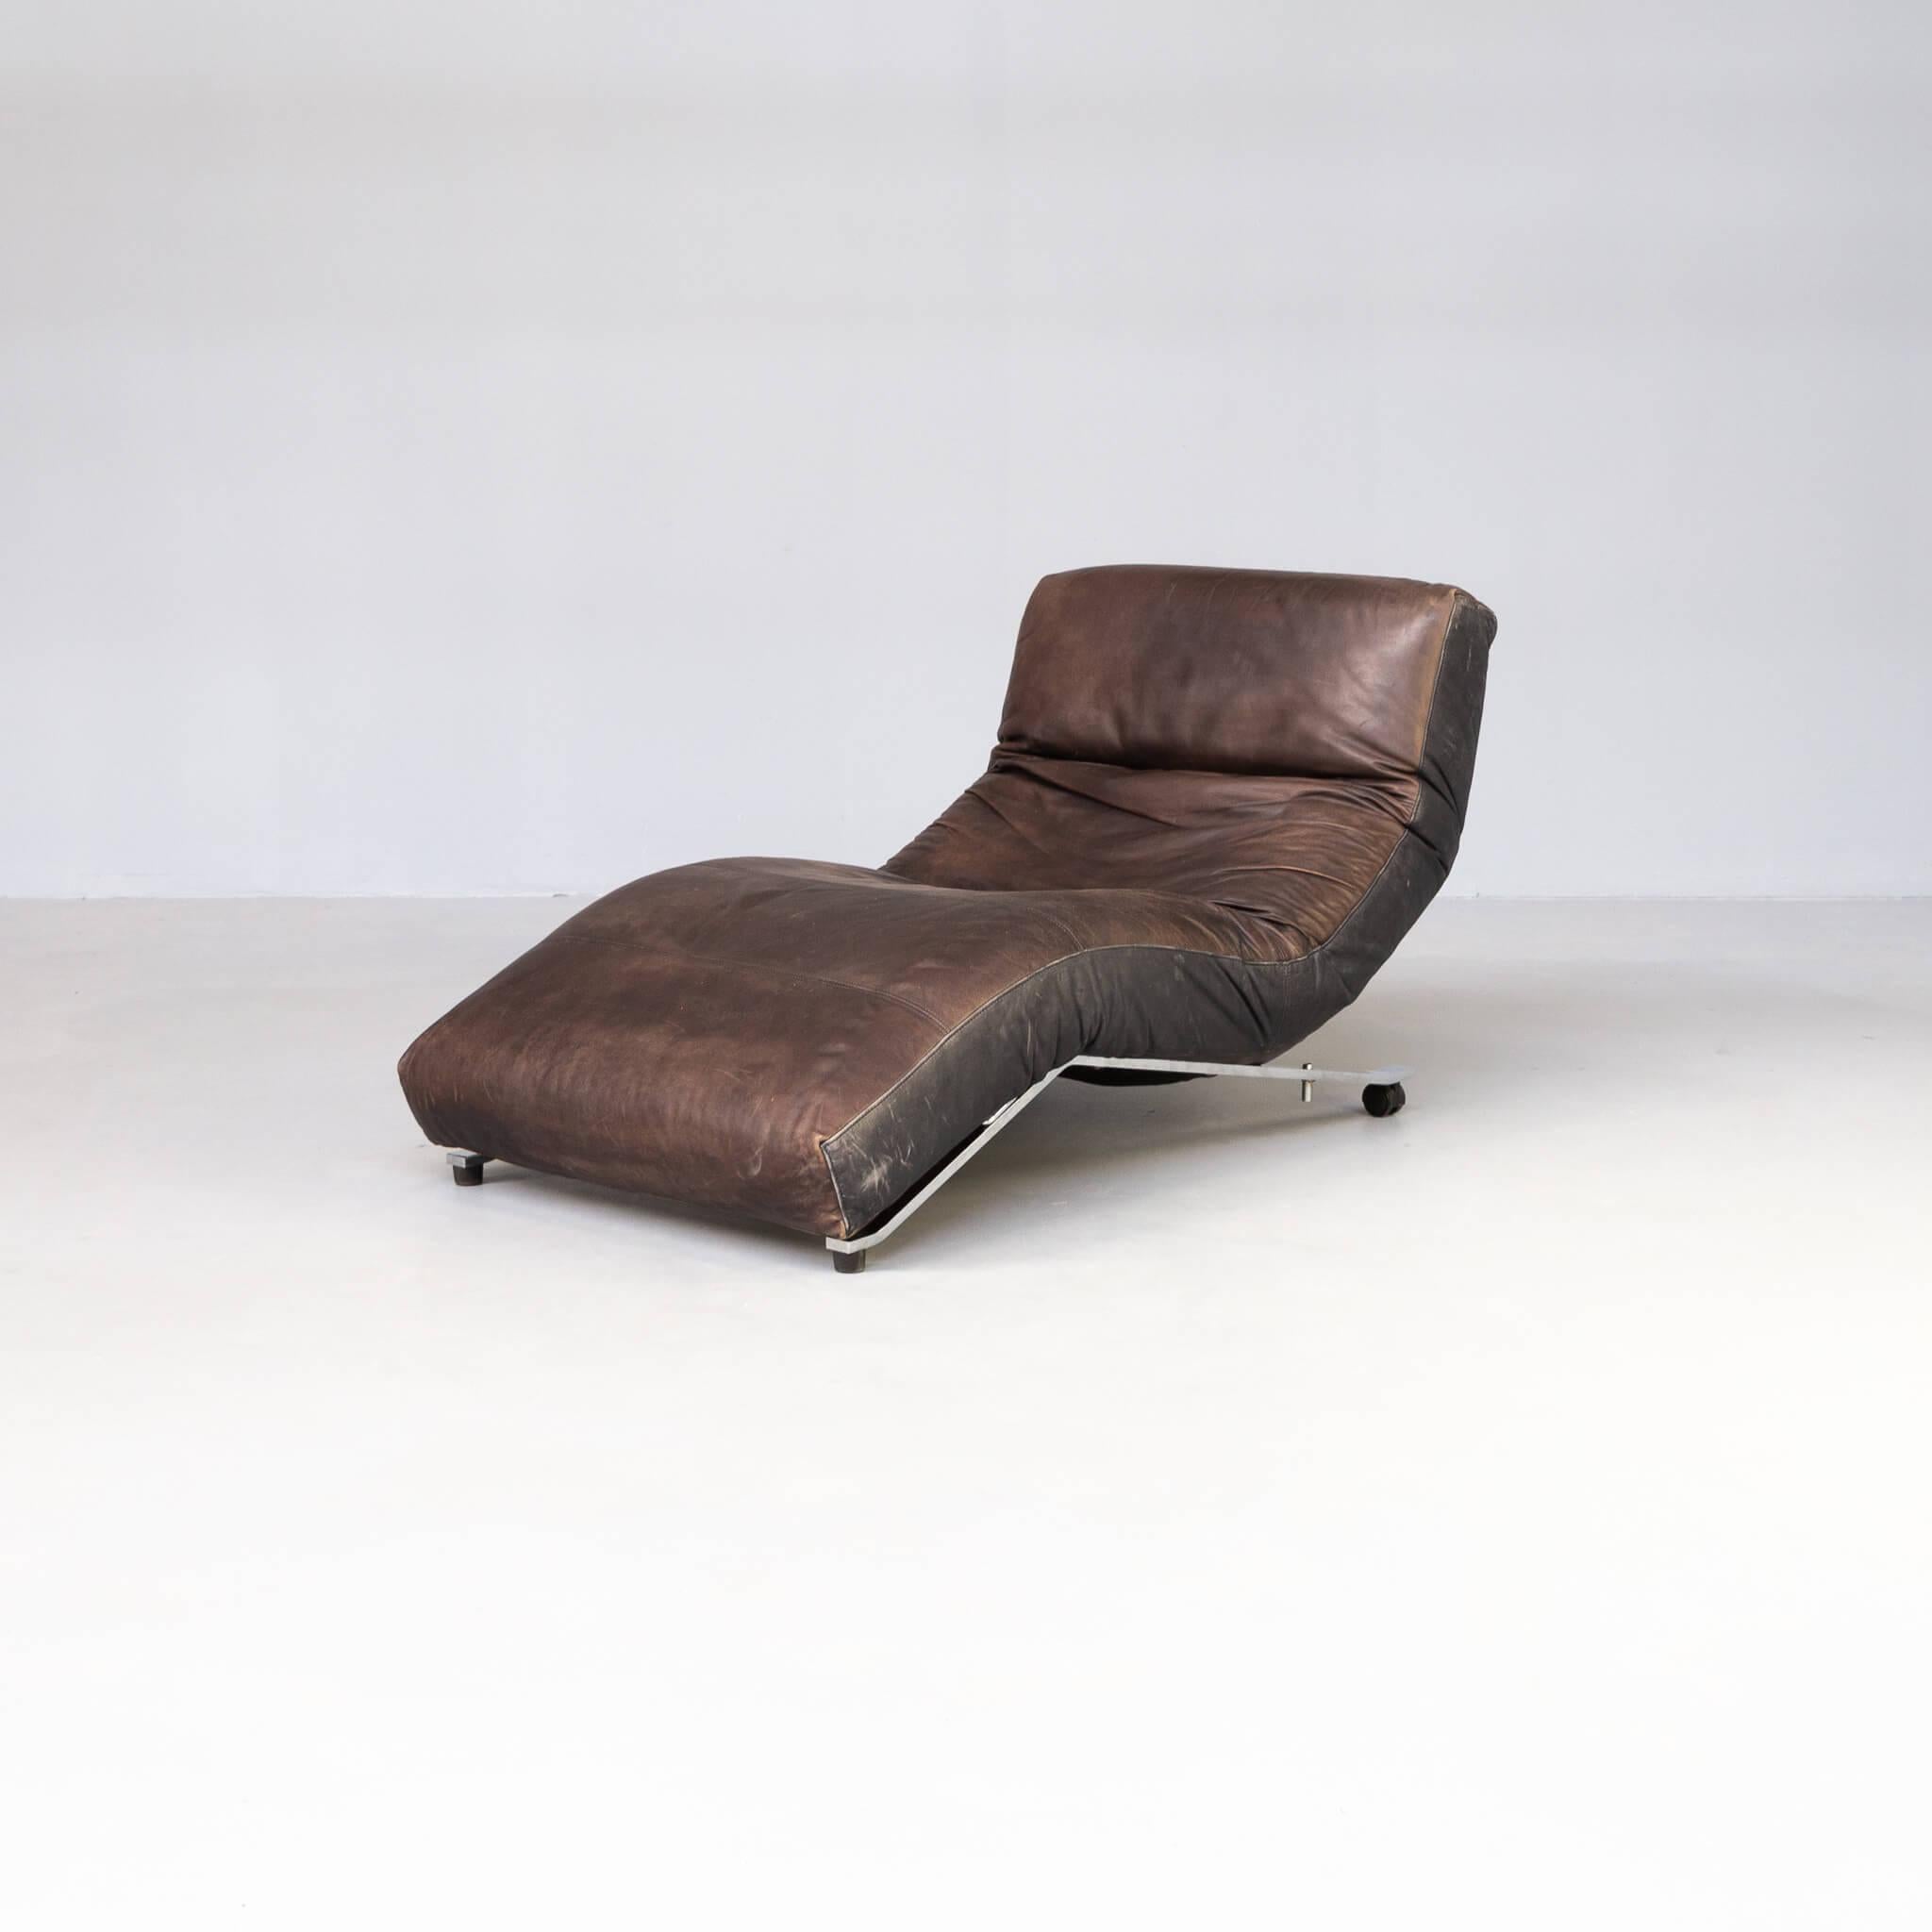 Control is the ultimate reclining chair and offers several different positions whether you are sitting or lying down. Control is made up of four independent sections, which give the chair an unusual flexible anatomy. Rest, read or watch TV – it is